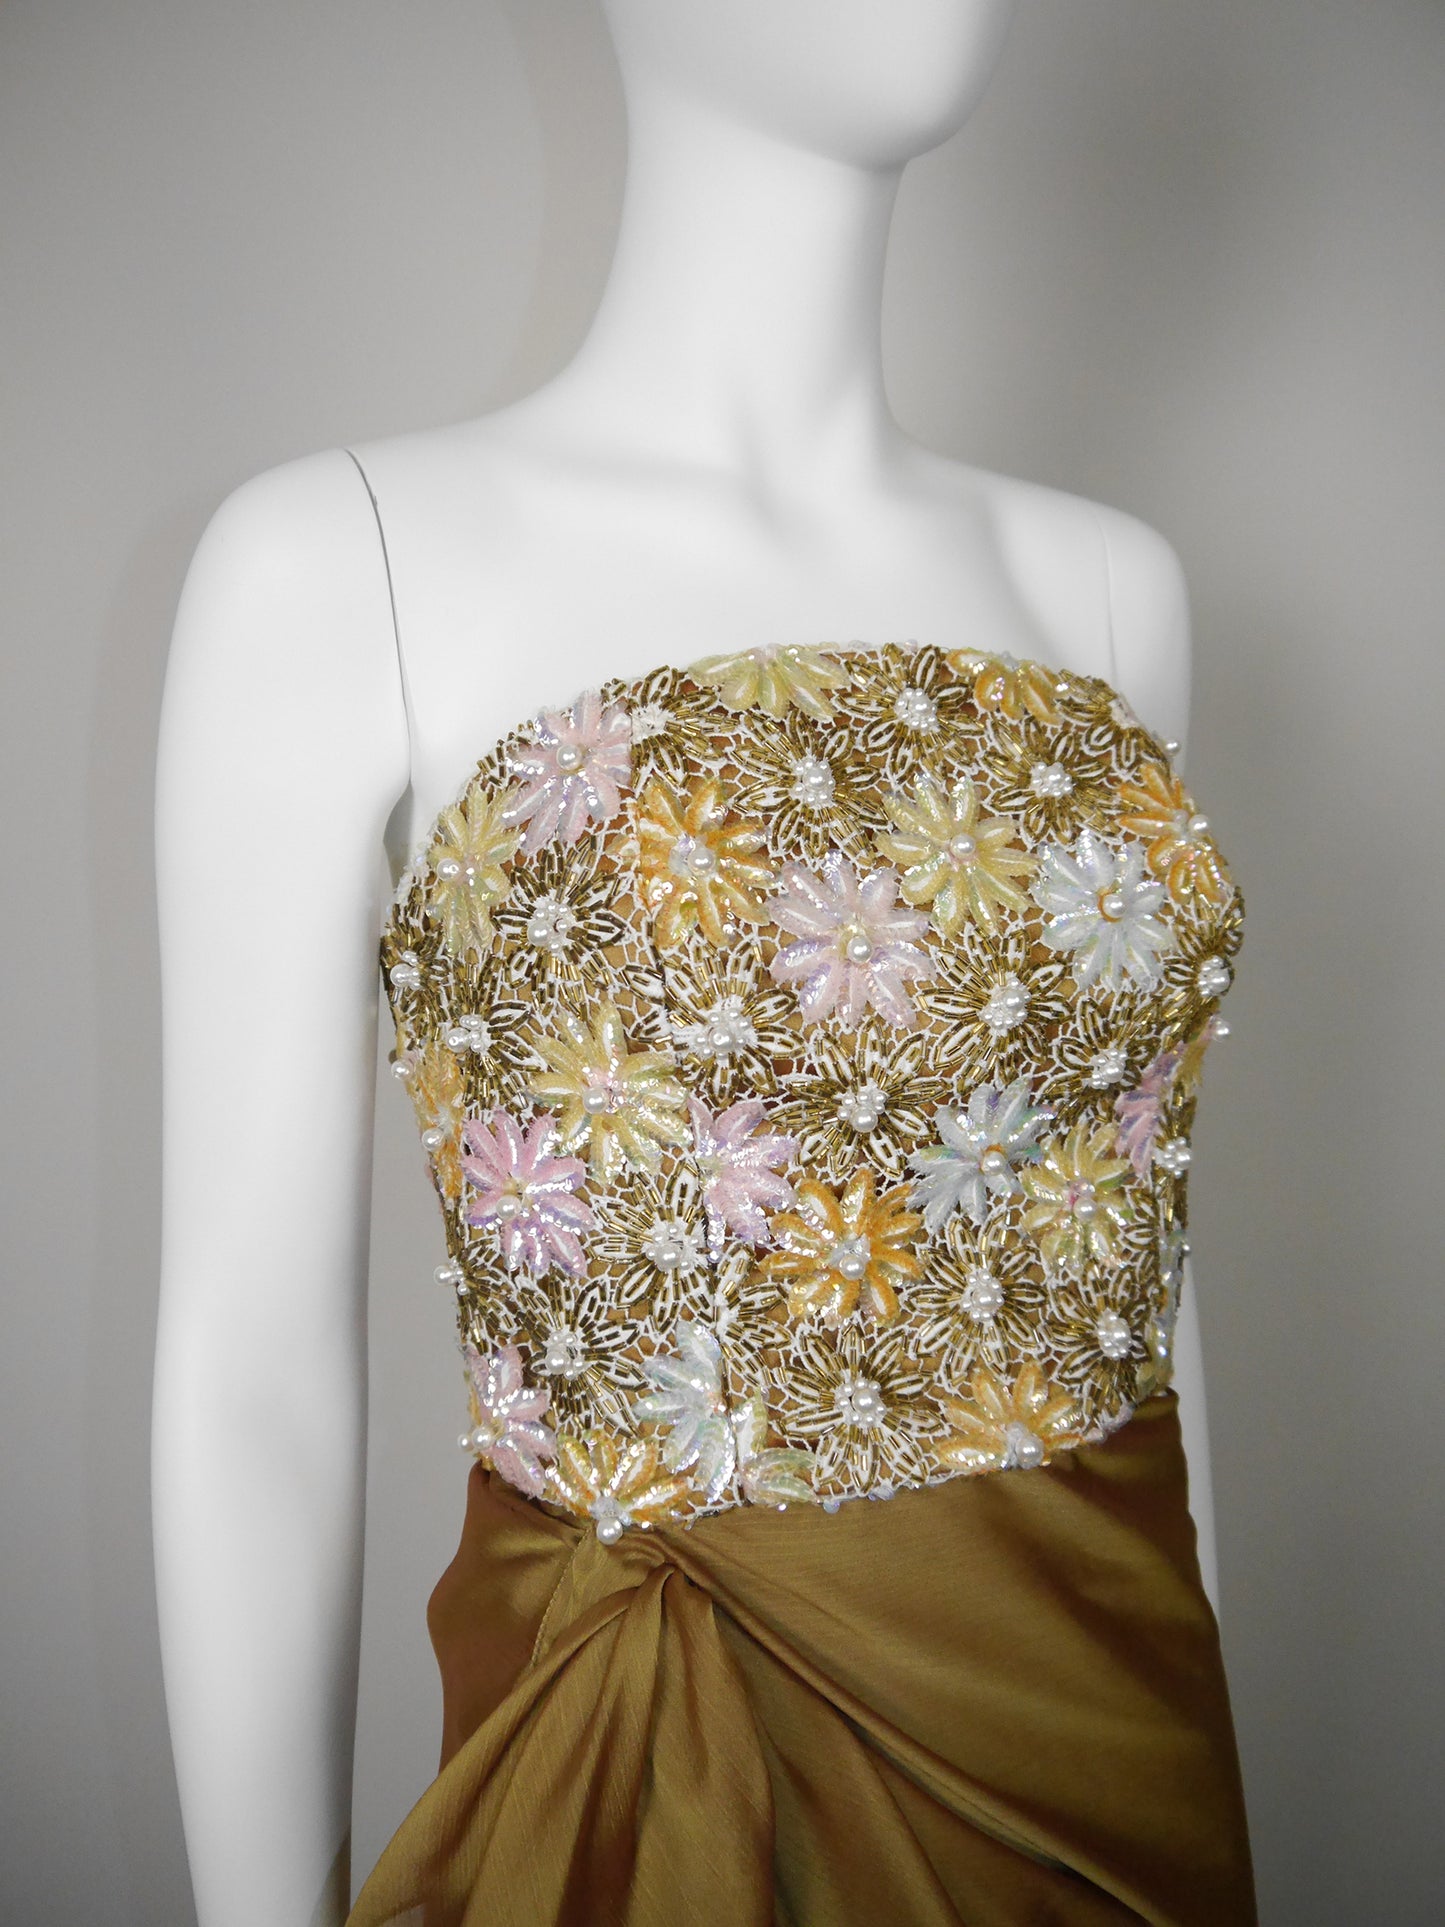 NINA RICCI 1990s Vintage Heavily Beaded Copper Gold Strapless Evening Gown w/ Stole